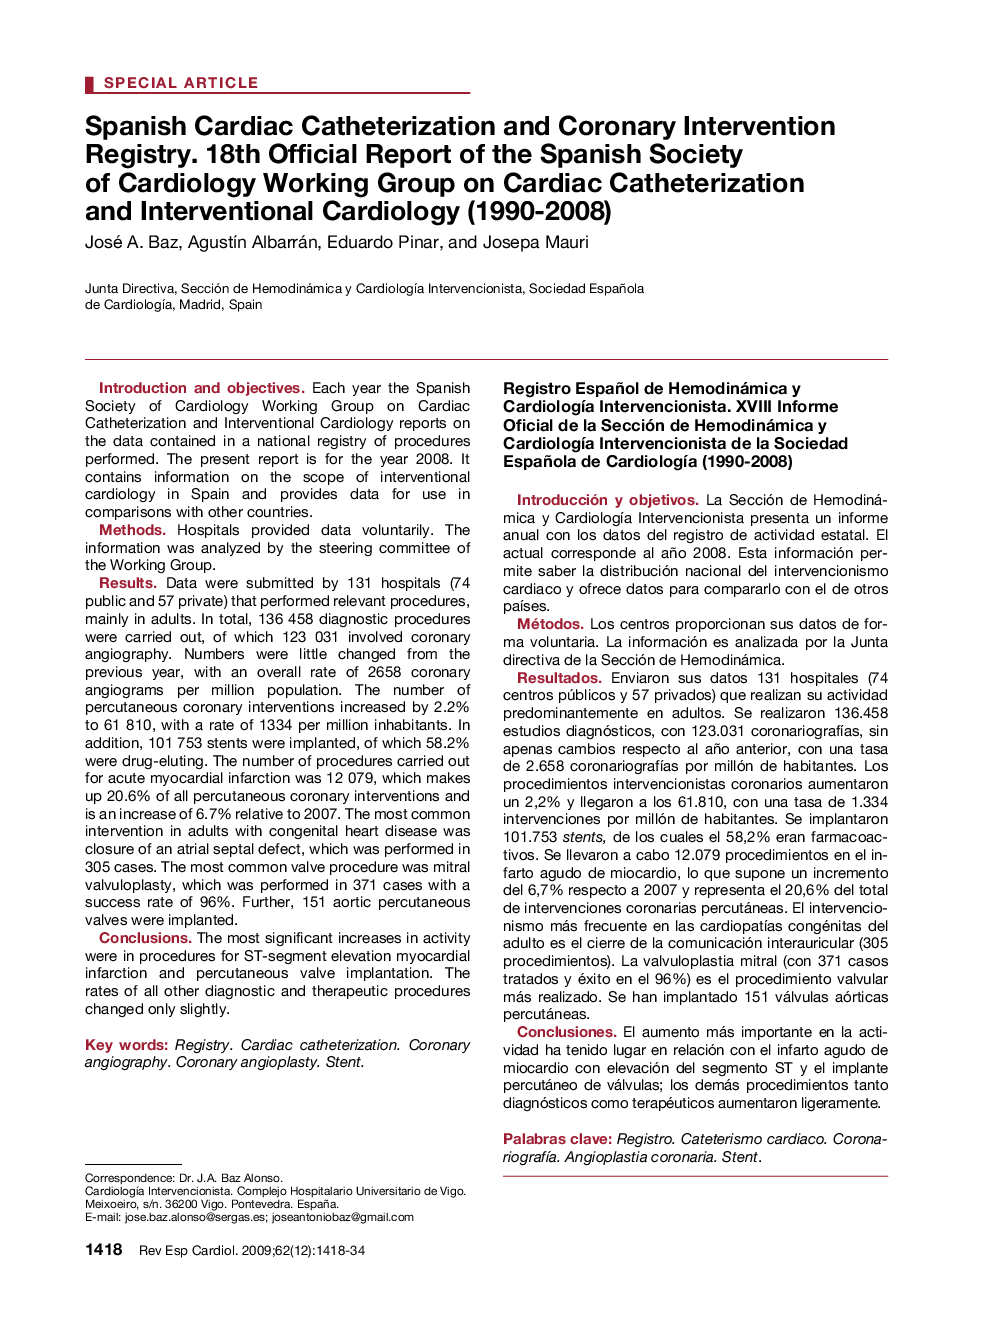 Spanish Cardiac Catheterization and Coronary Intervention Registry. 18th Official Report of the Spanish Society of Cardiology Working Group on Cardiac Catheterization and Interventional Cardiology (1990-2008)